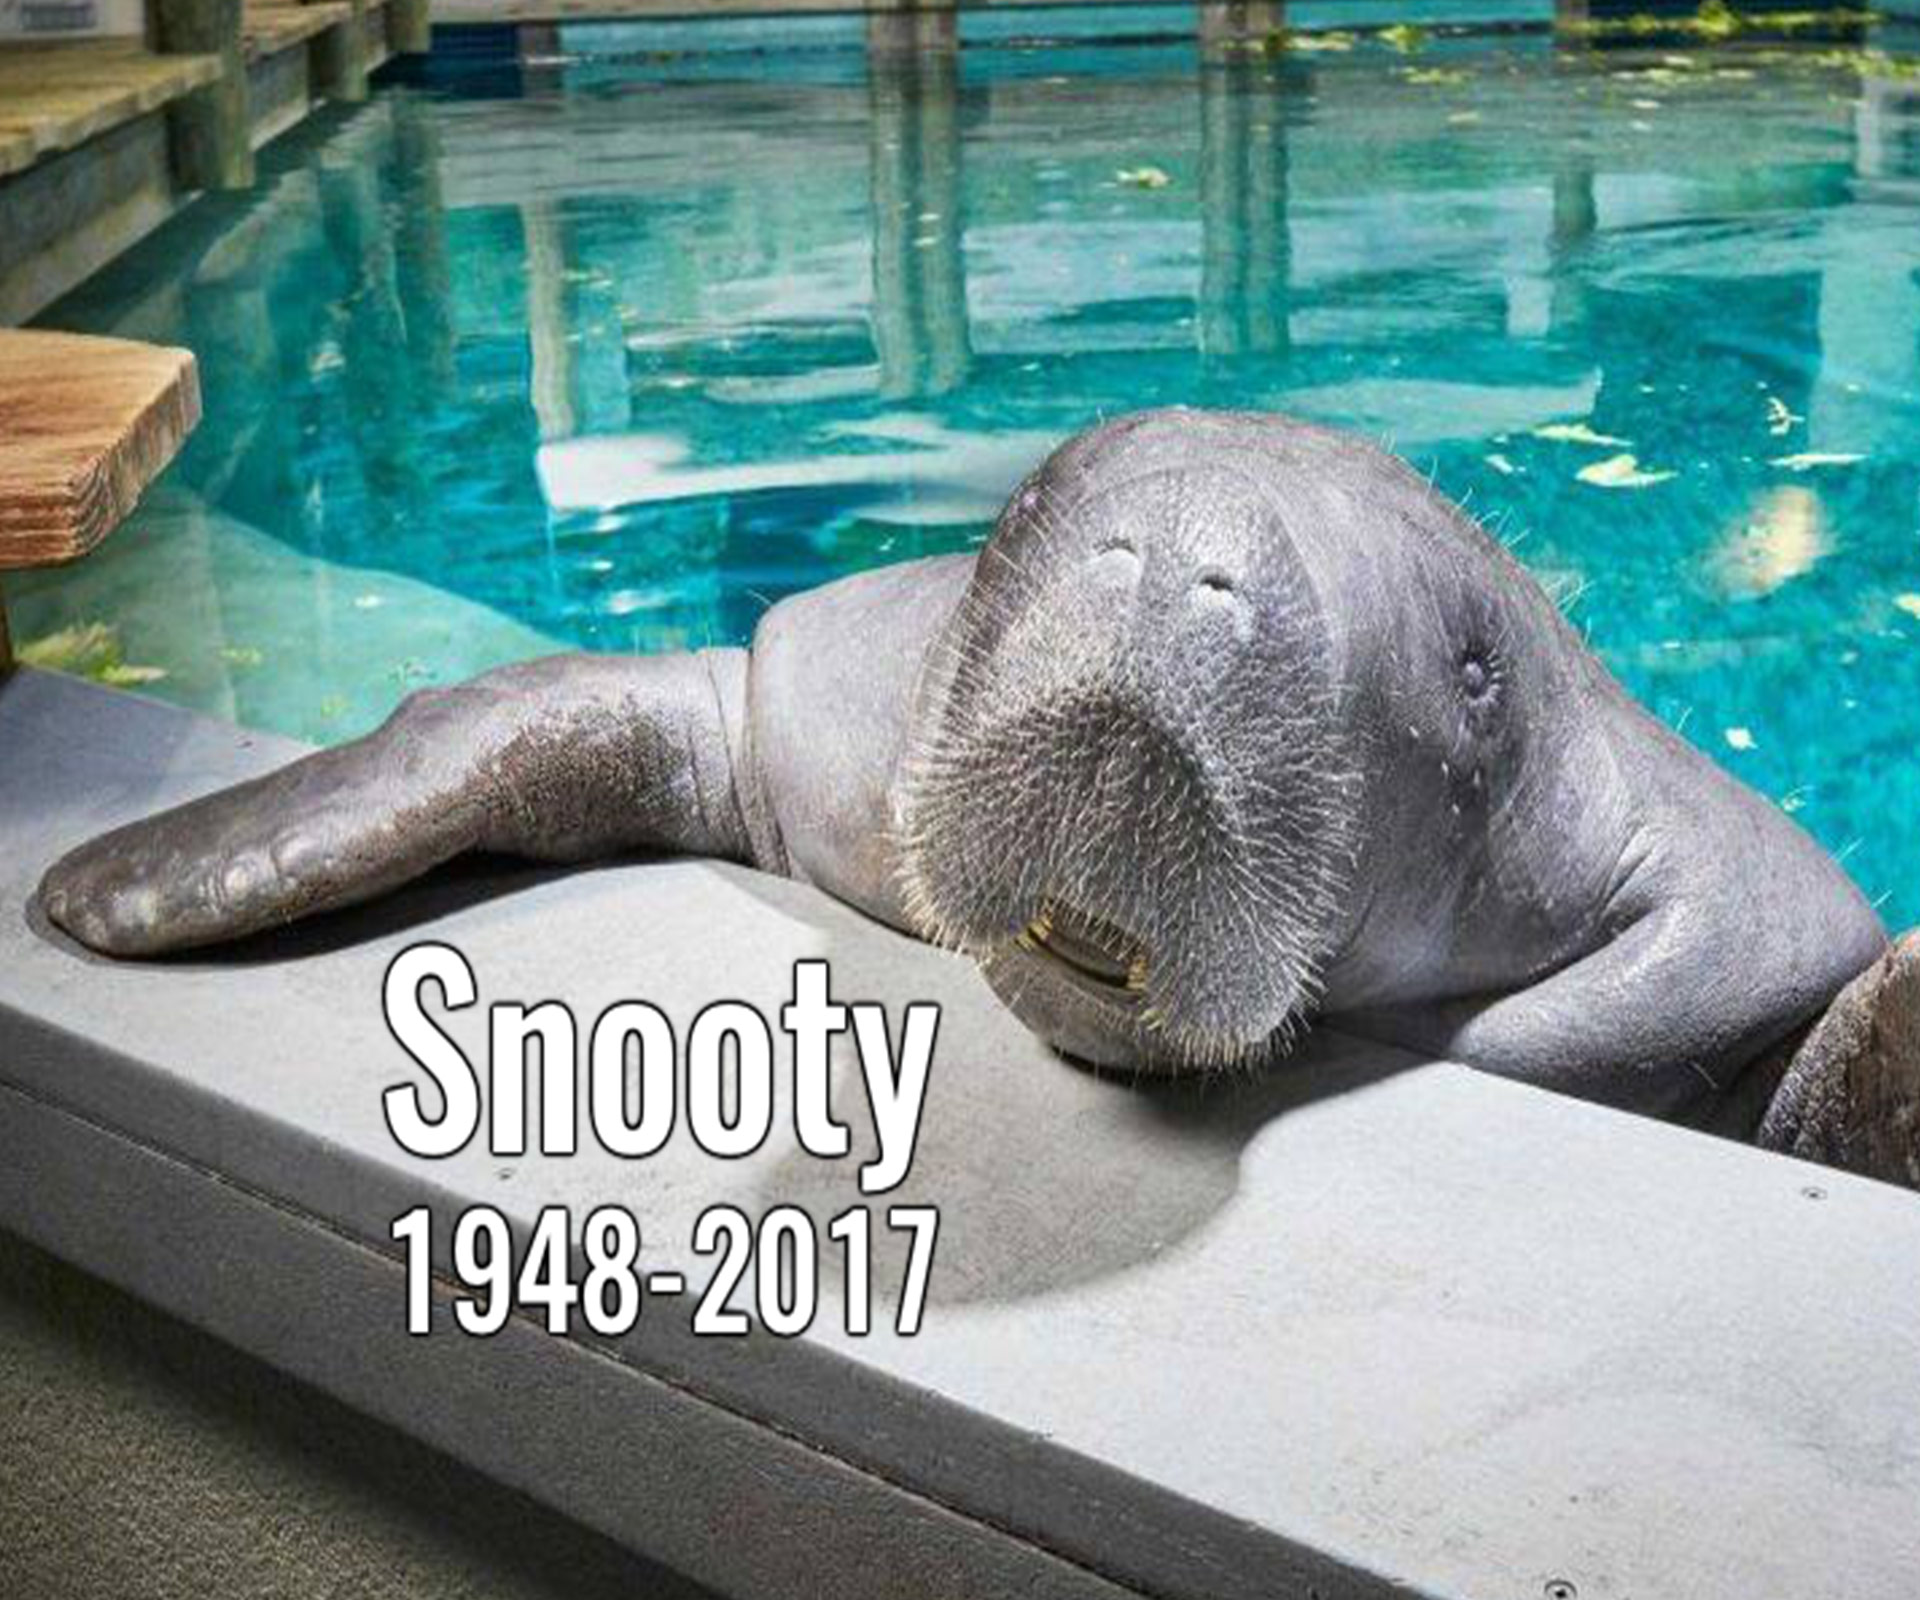 Snooty, the world's oldest Manatee has died